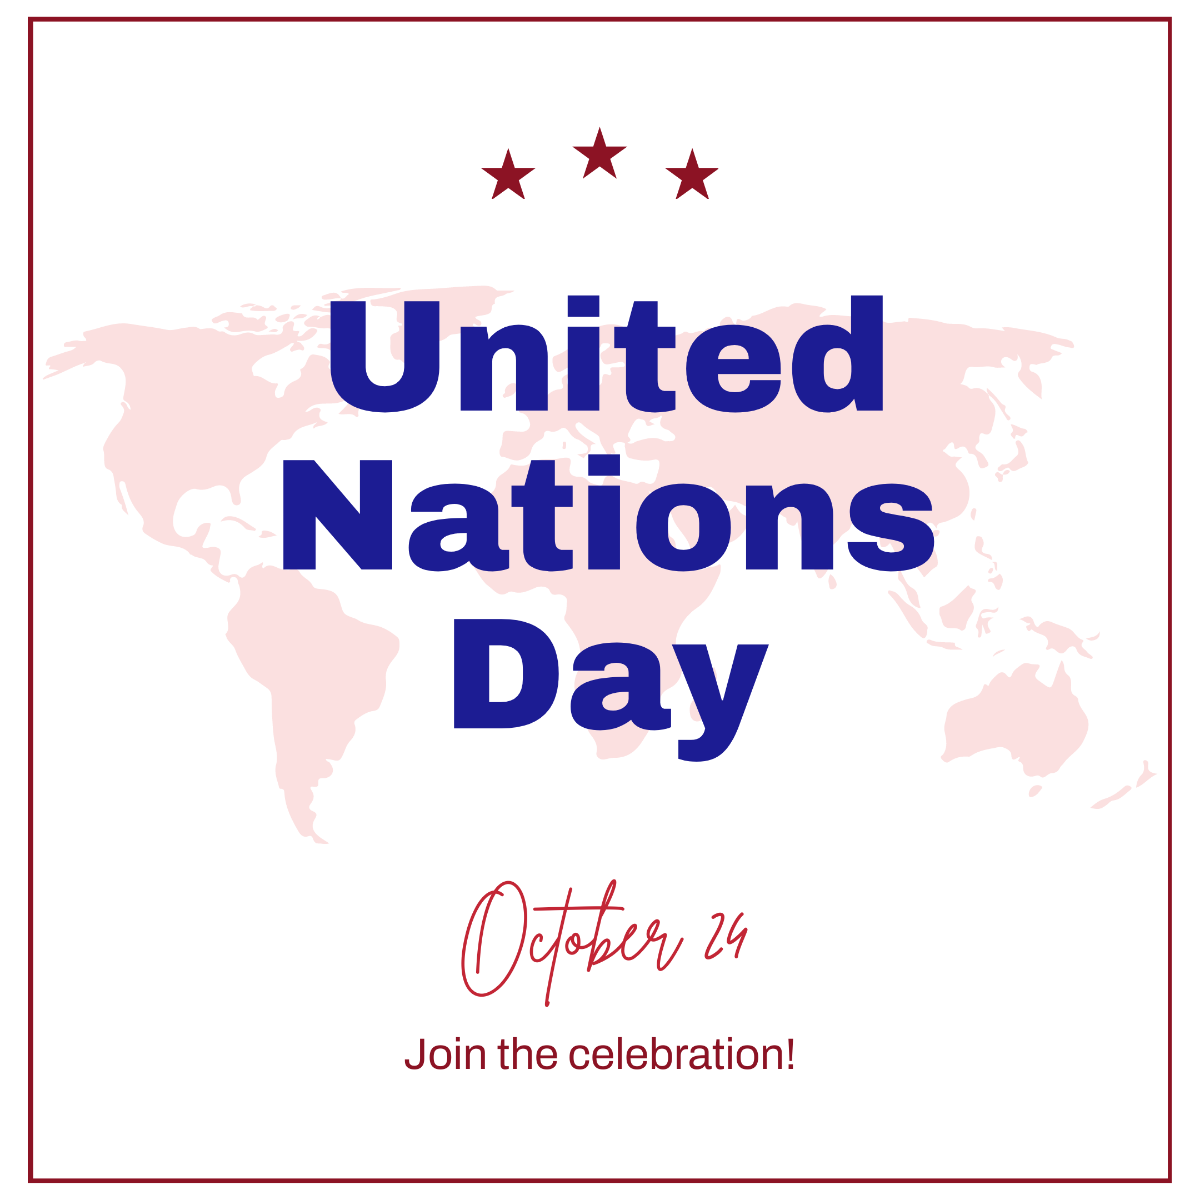 United Nations Day FB Post